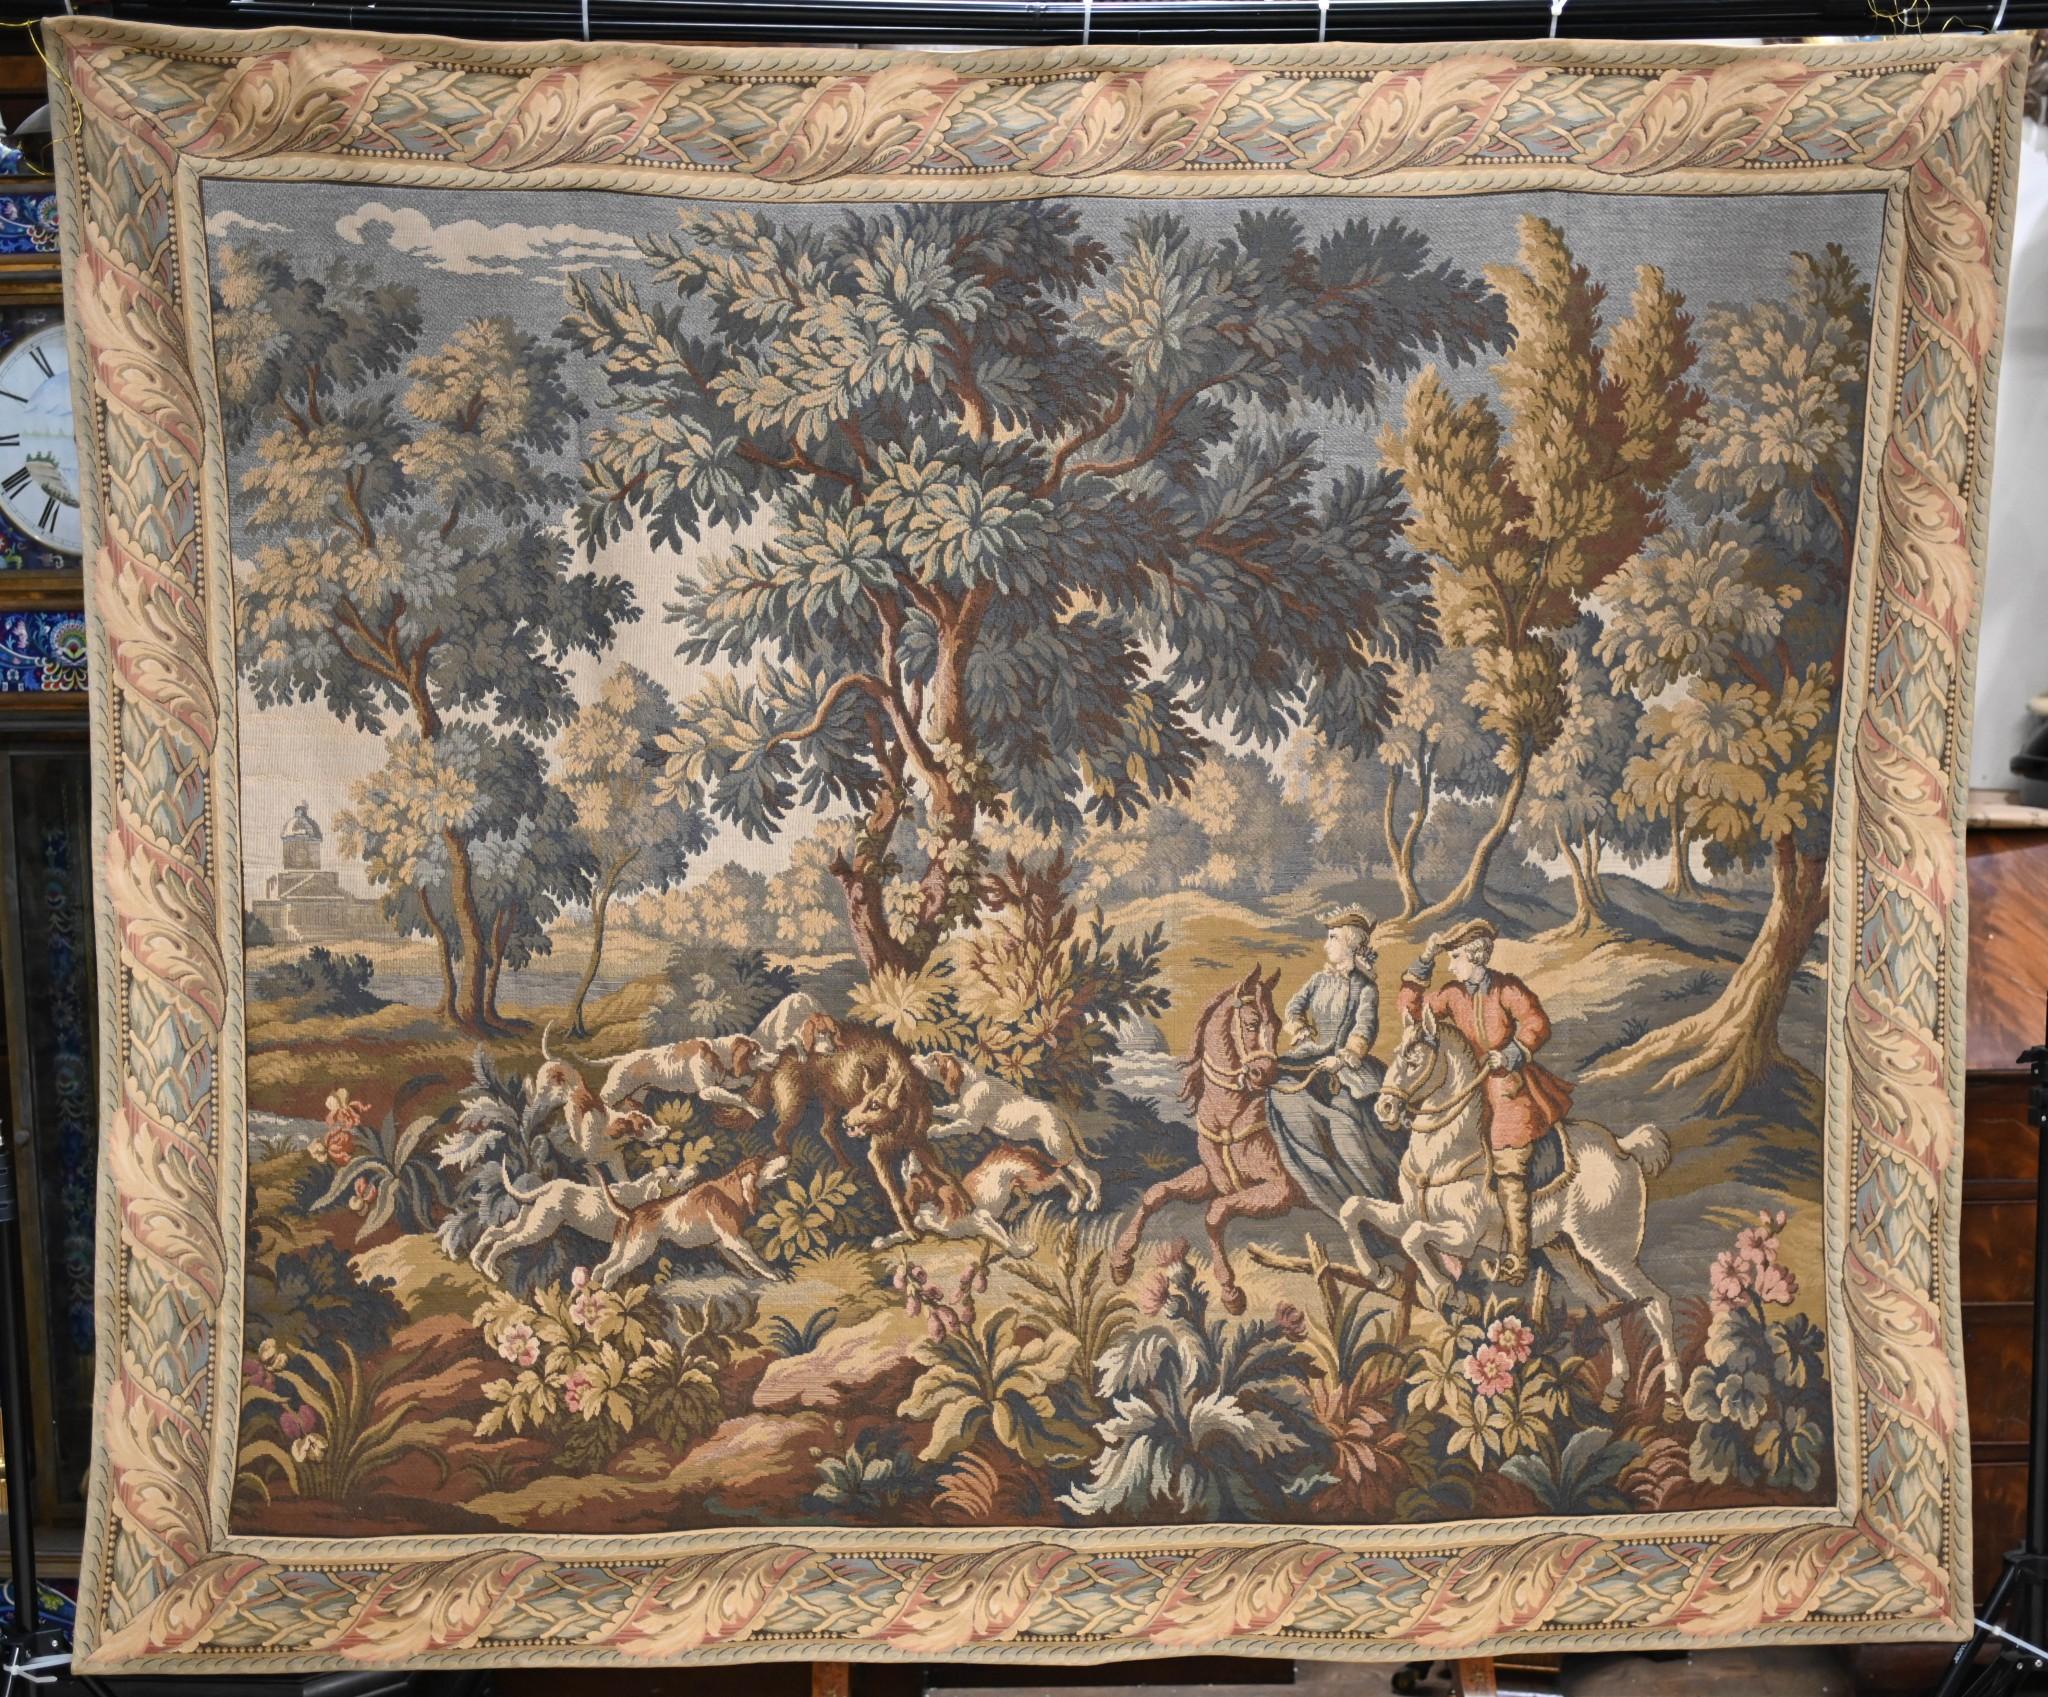 Glorious antique French verdure tapestry depicting a hunt scene
Great size and work well as a wall hanging
Very detailed scenes, particularly the trees, foliage and of course the characters in the hunt
'Verdure' (foliage) tapestries were woven